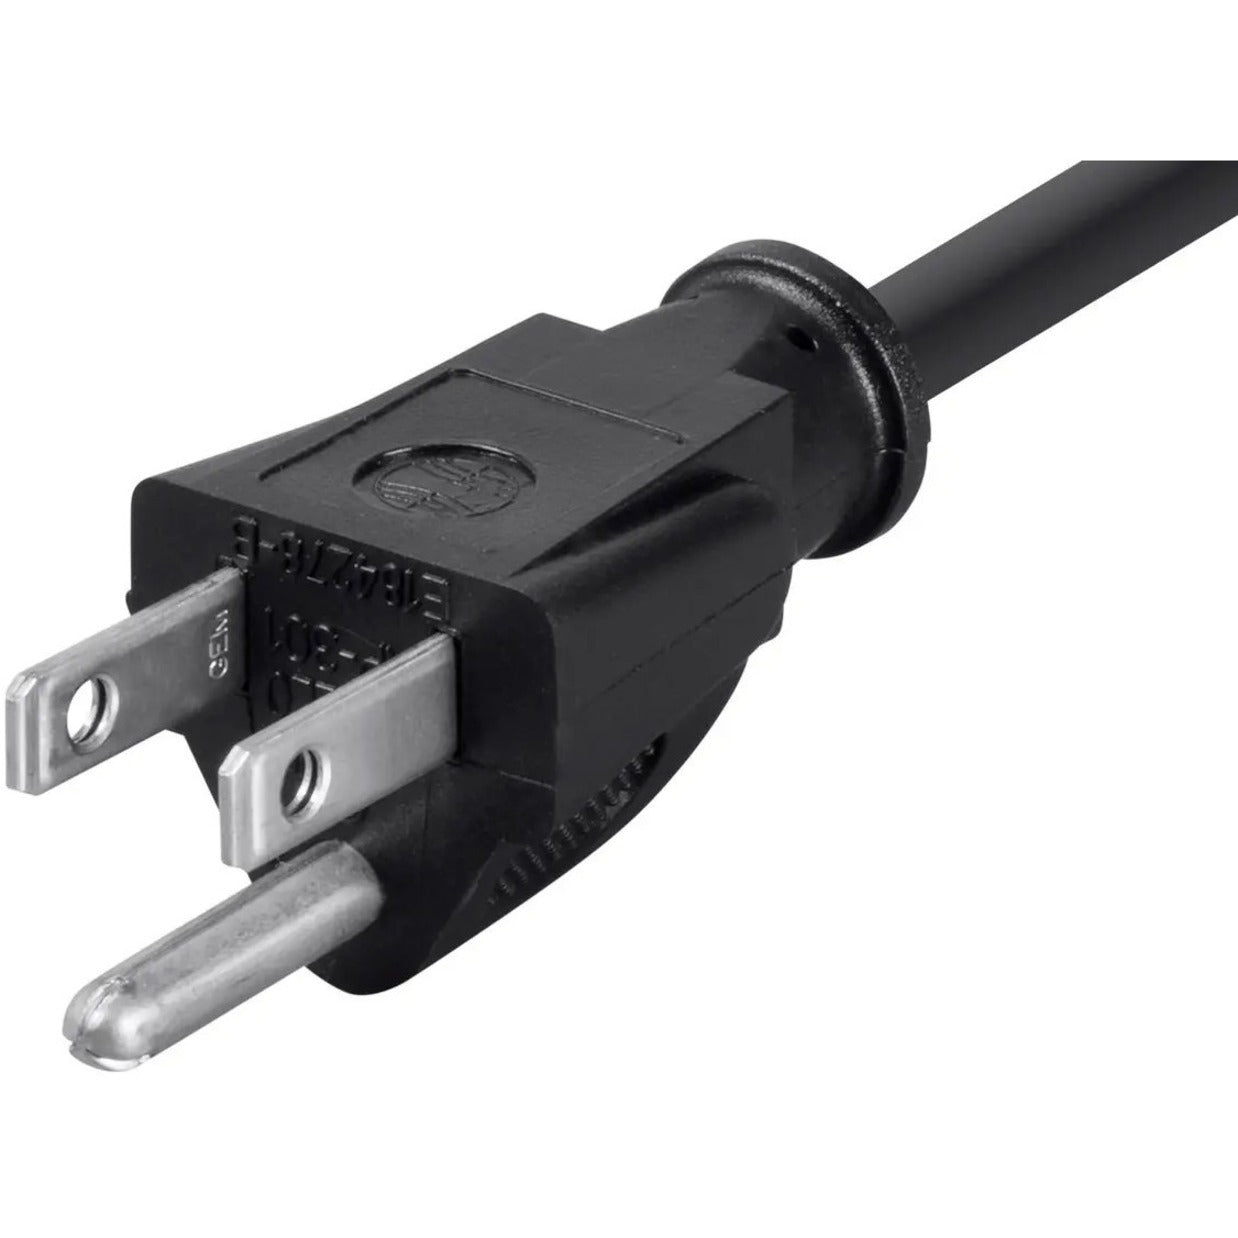 Monoprice 5296 Standard Power Cord, 1 ft, 125V AC, 13A, Environmentally Friendly, RoHS Certified